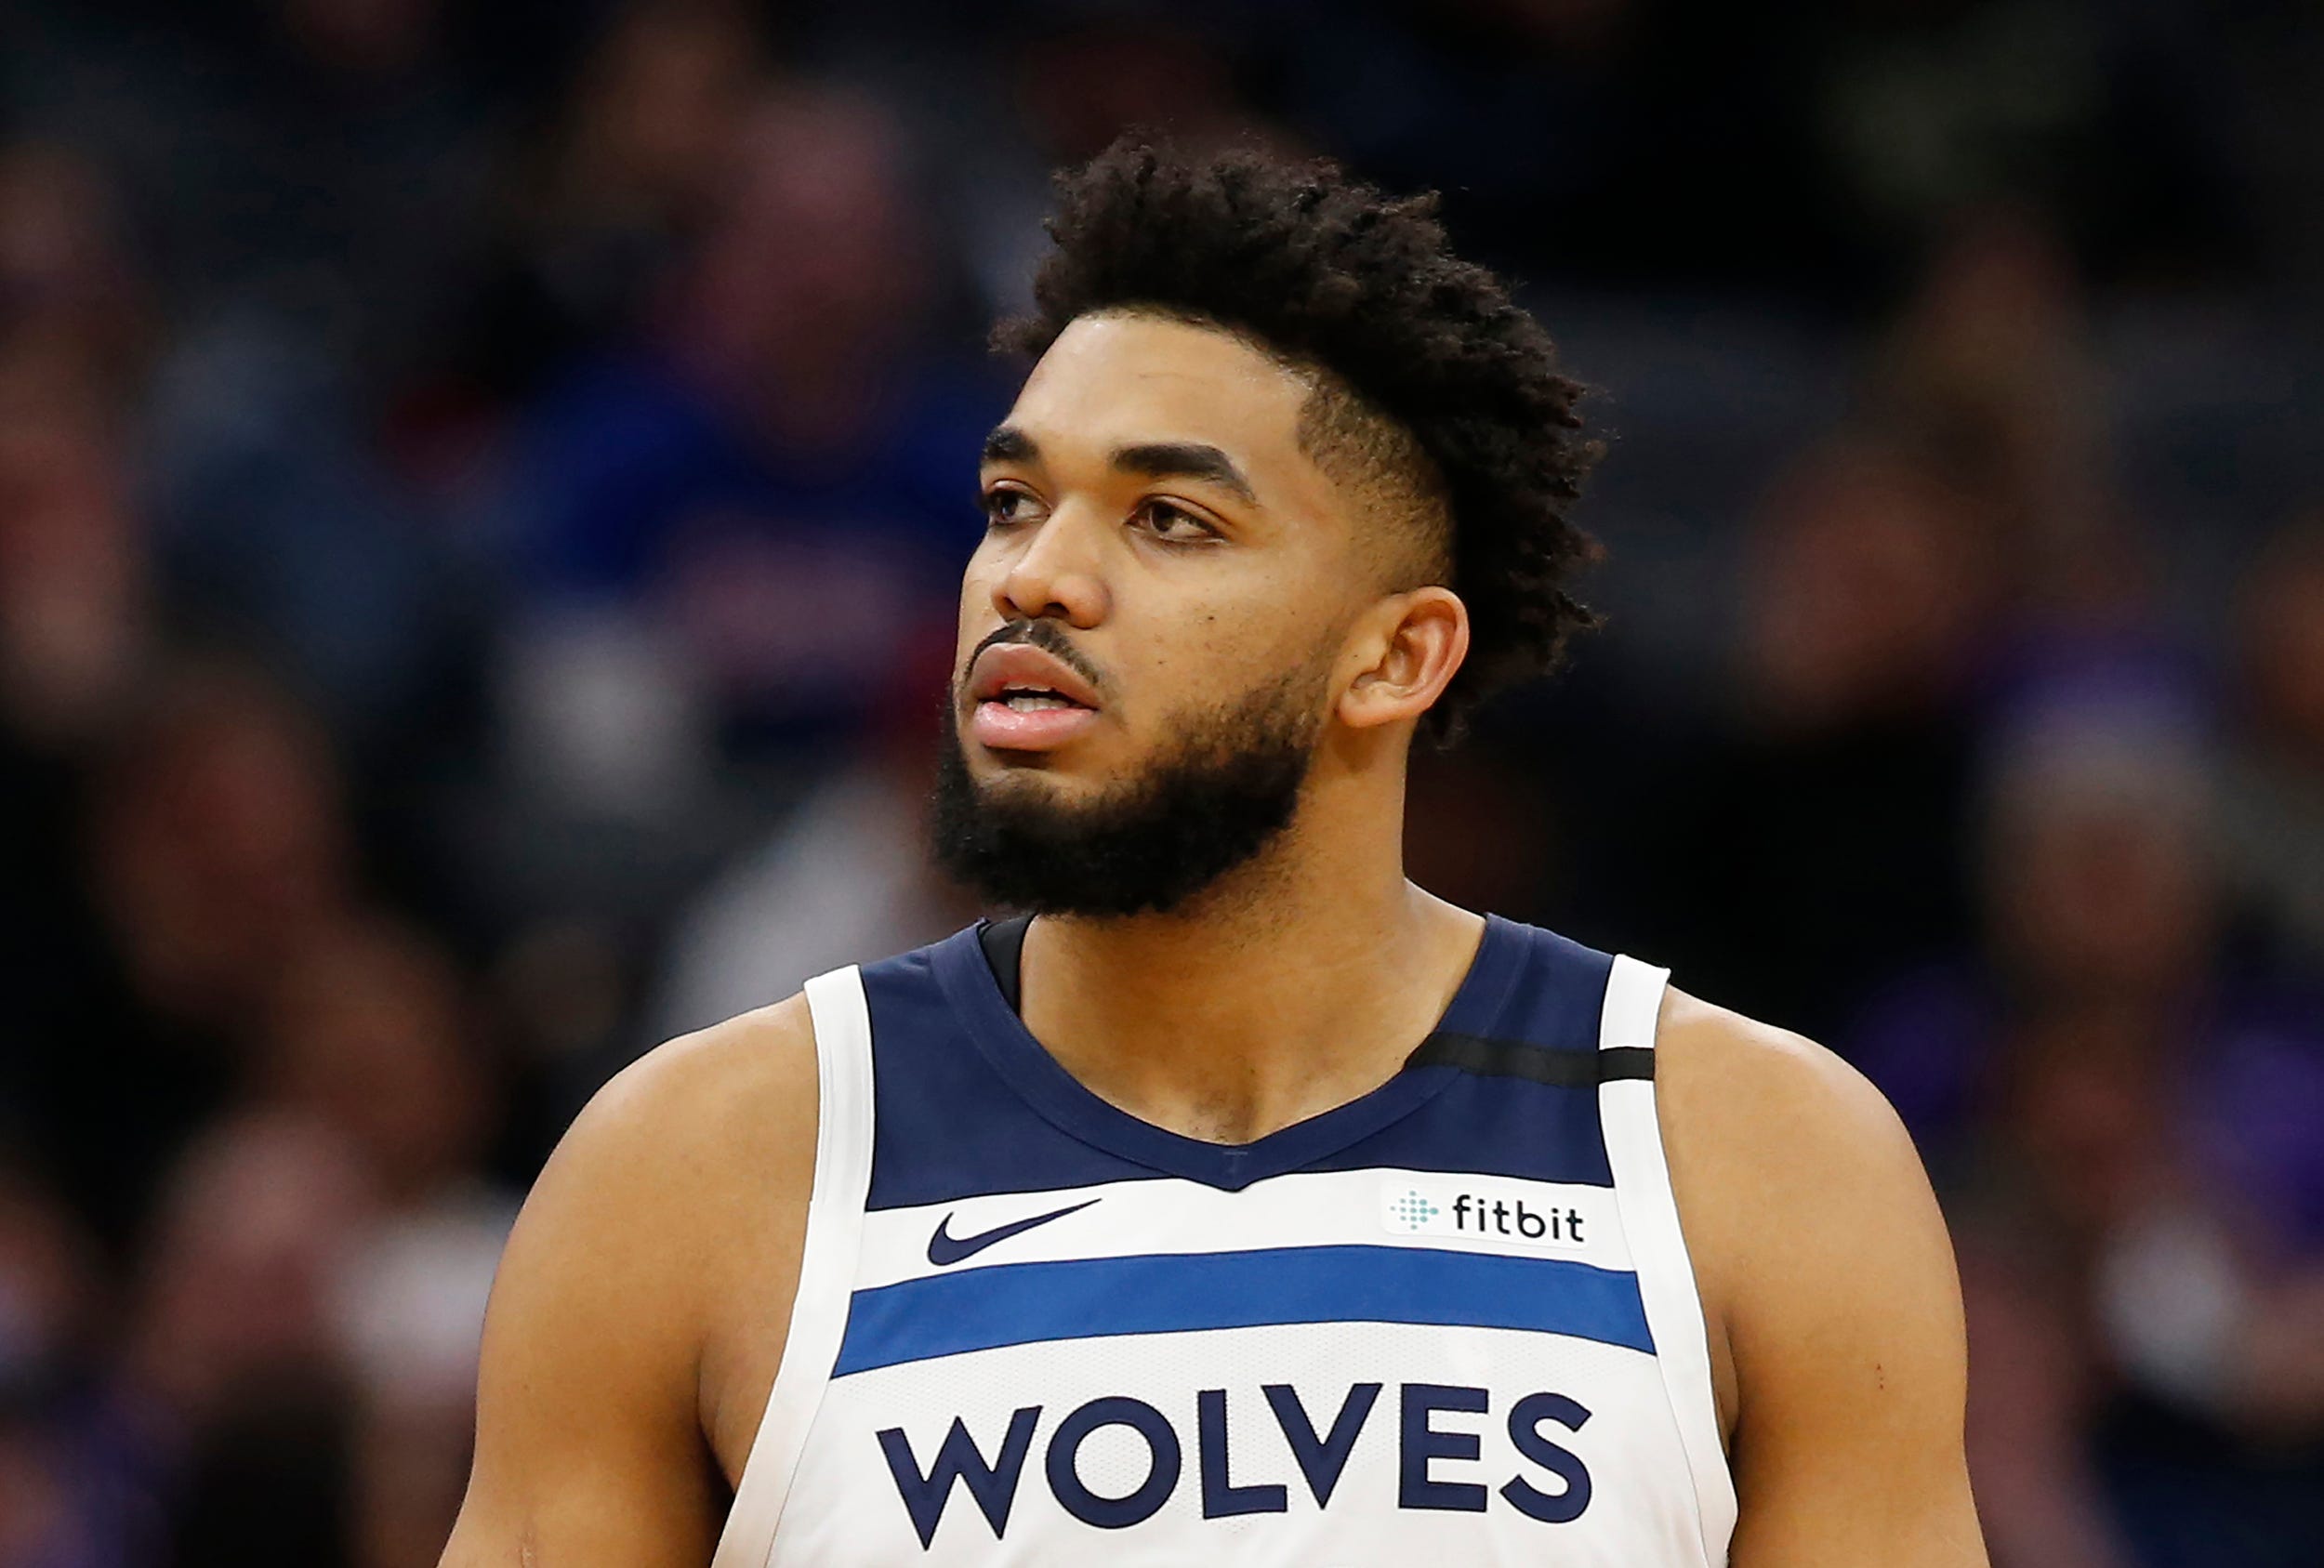 More on Karl-Anthony Towns' astounding rookie season for Wolves